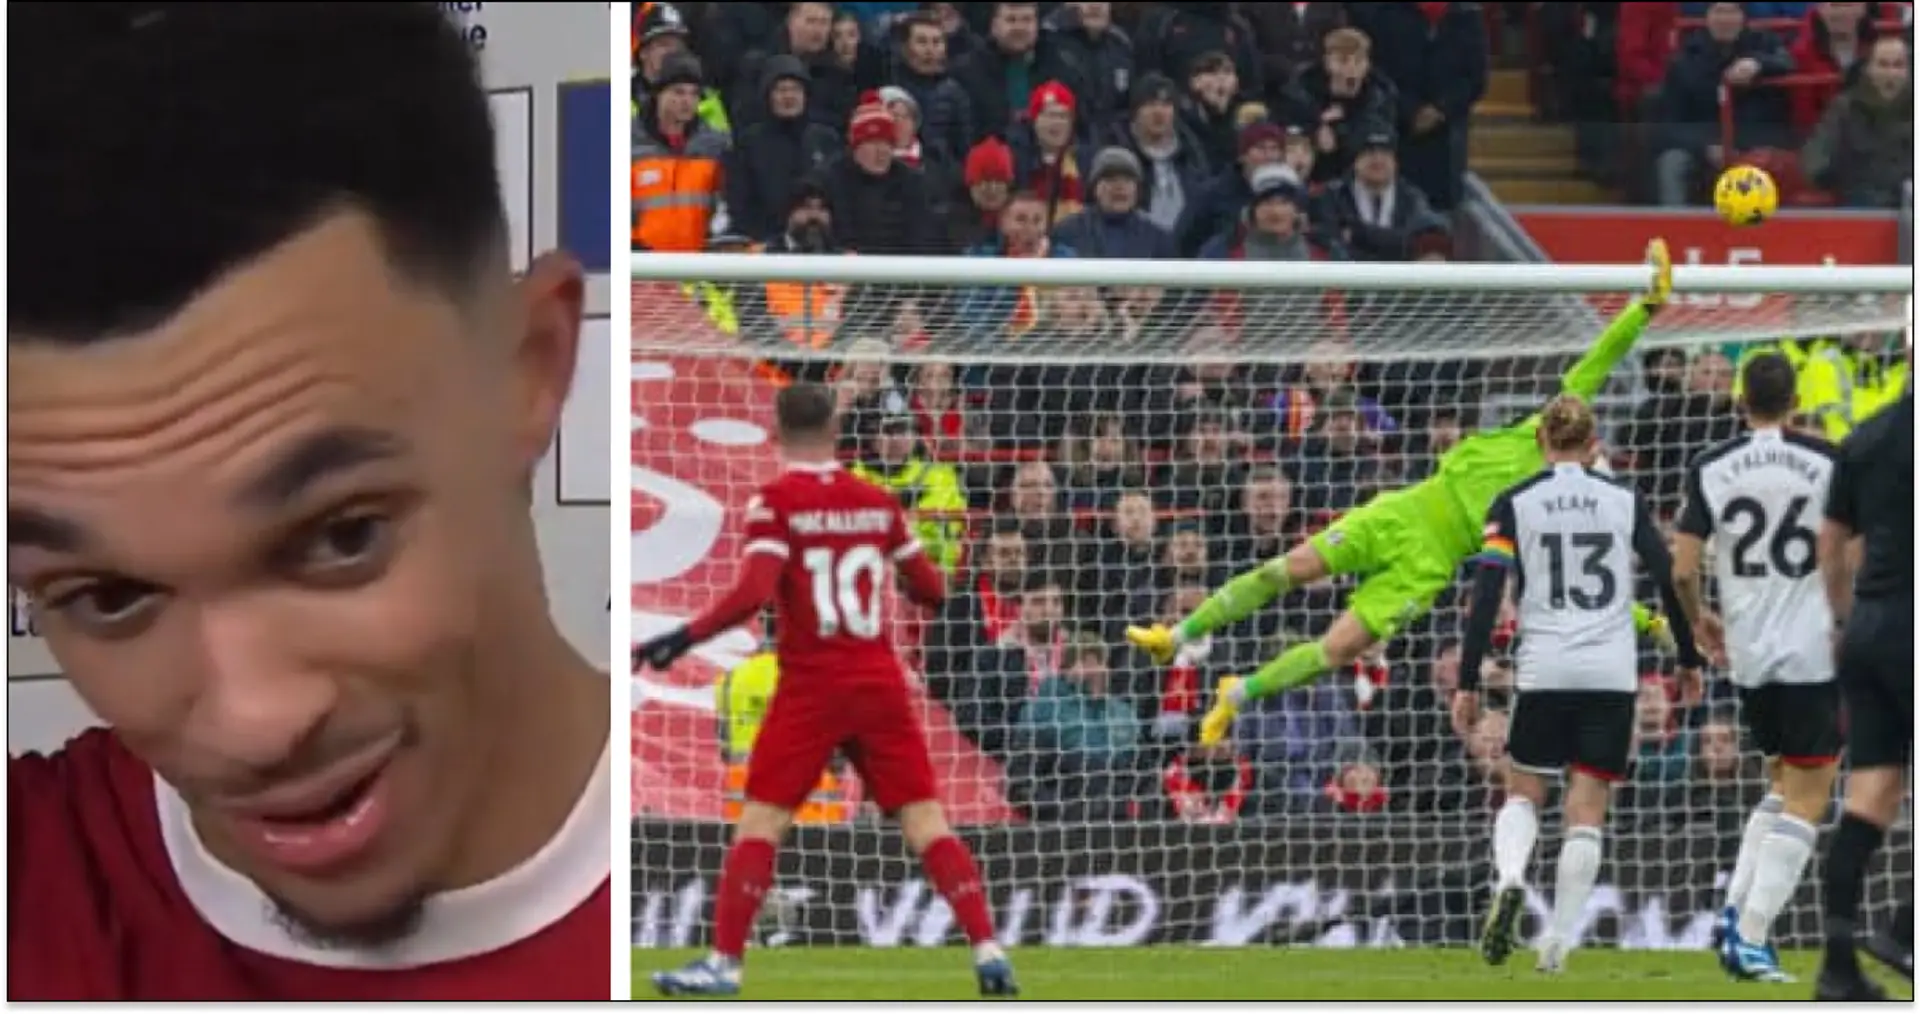 Trent: 'I'm thinking I could get Goal of the Month, 20 minutes later Macca laces into top bins like that!'